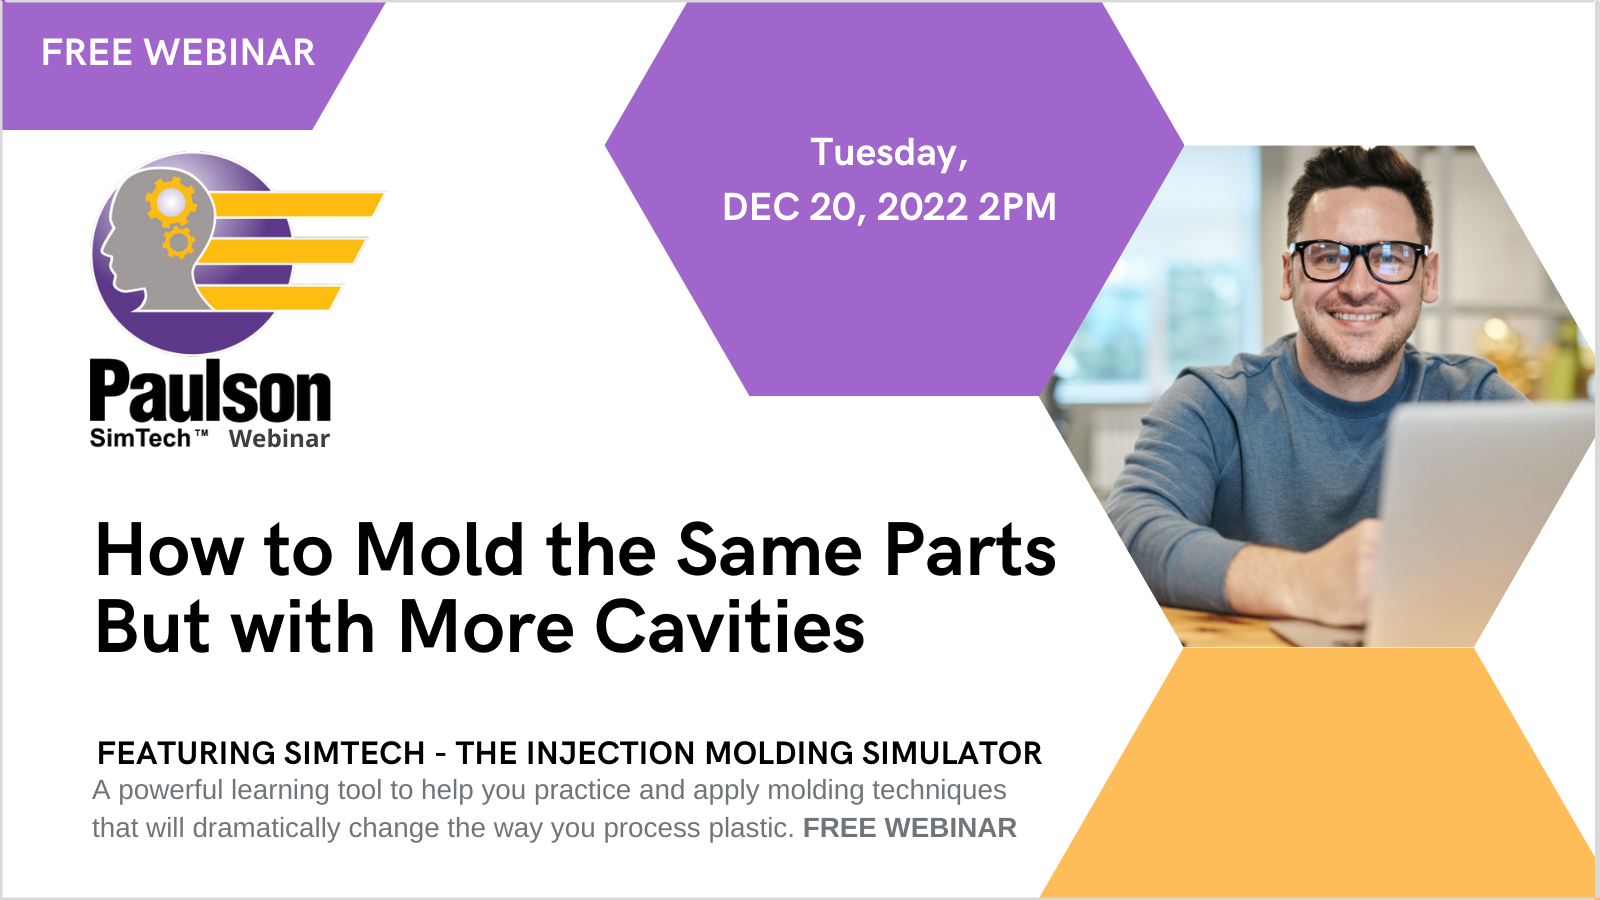 Webinar: How to Mold the Same Parts But with More Cavities